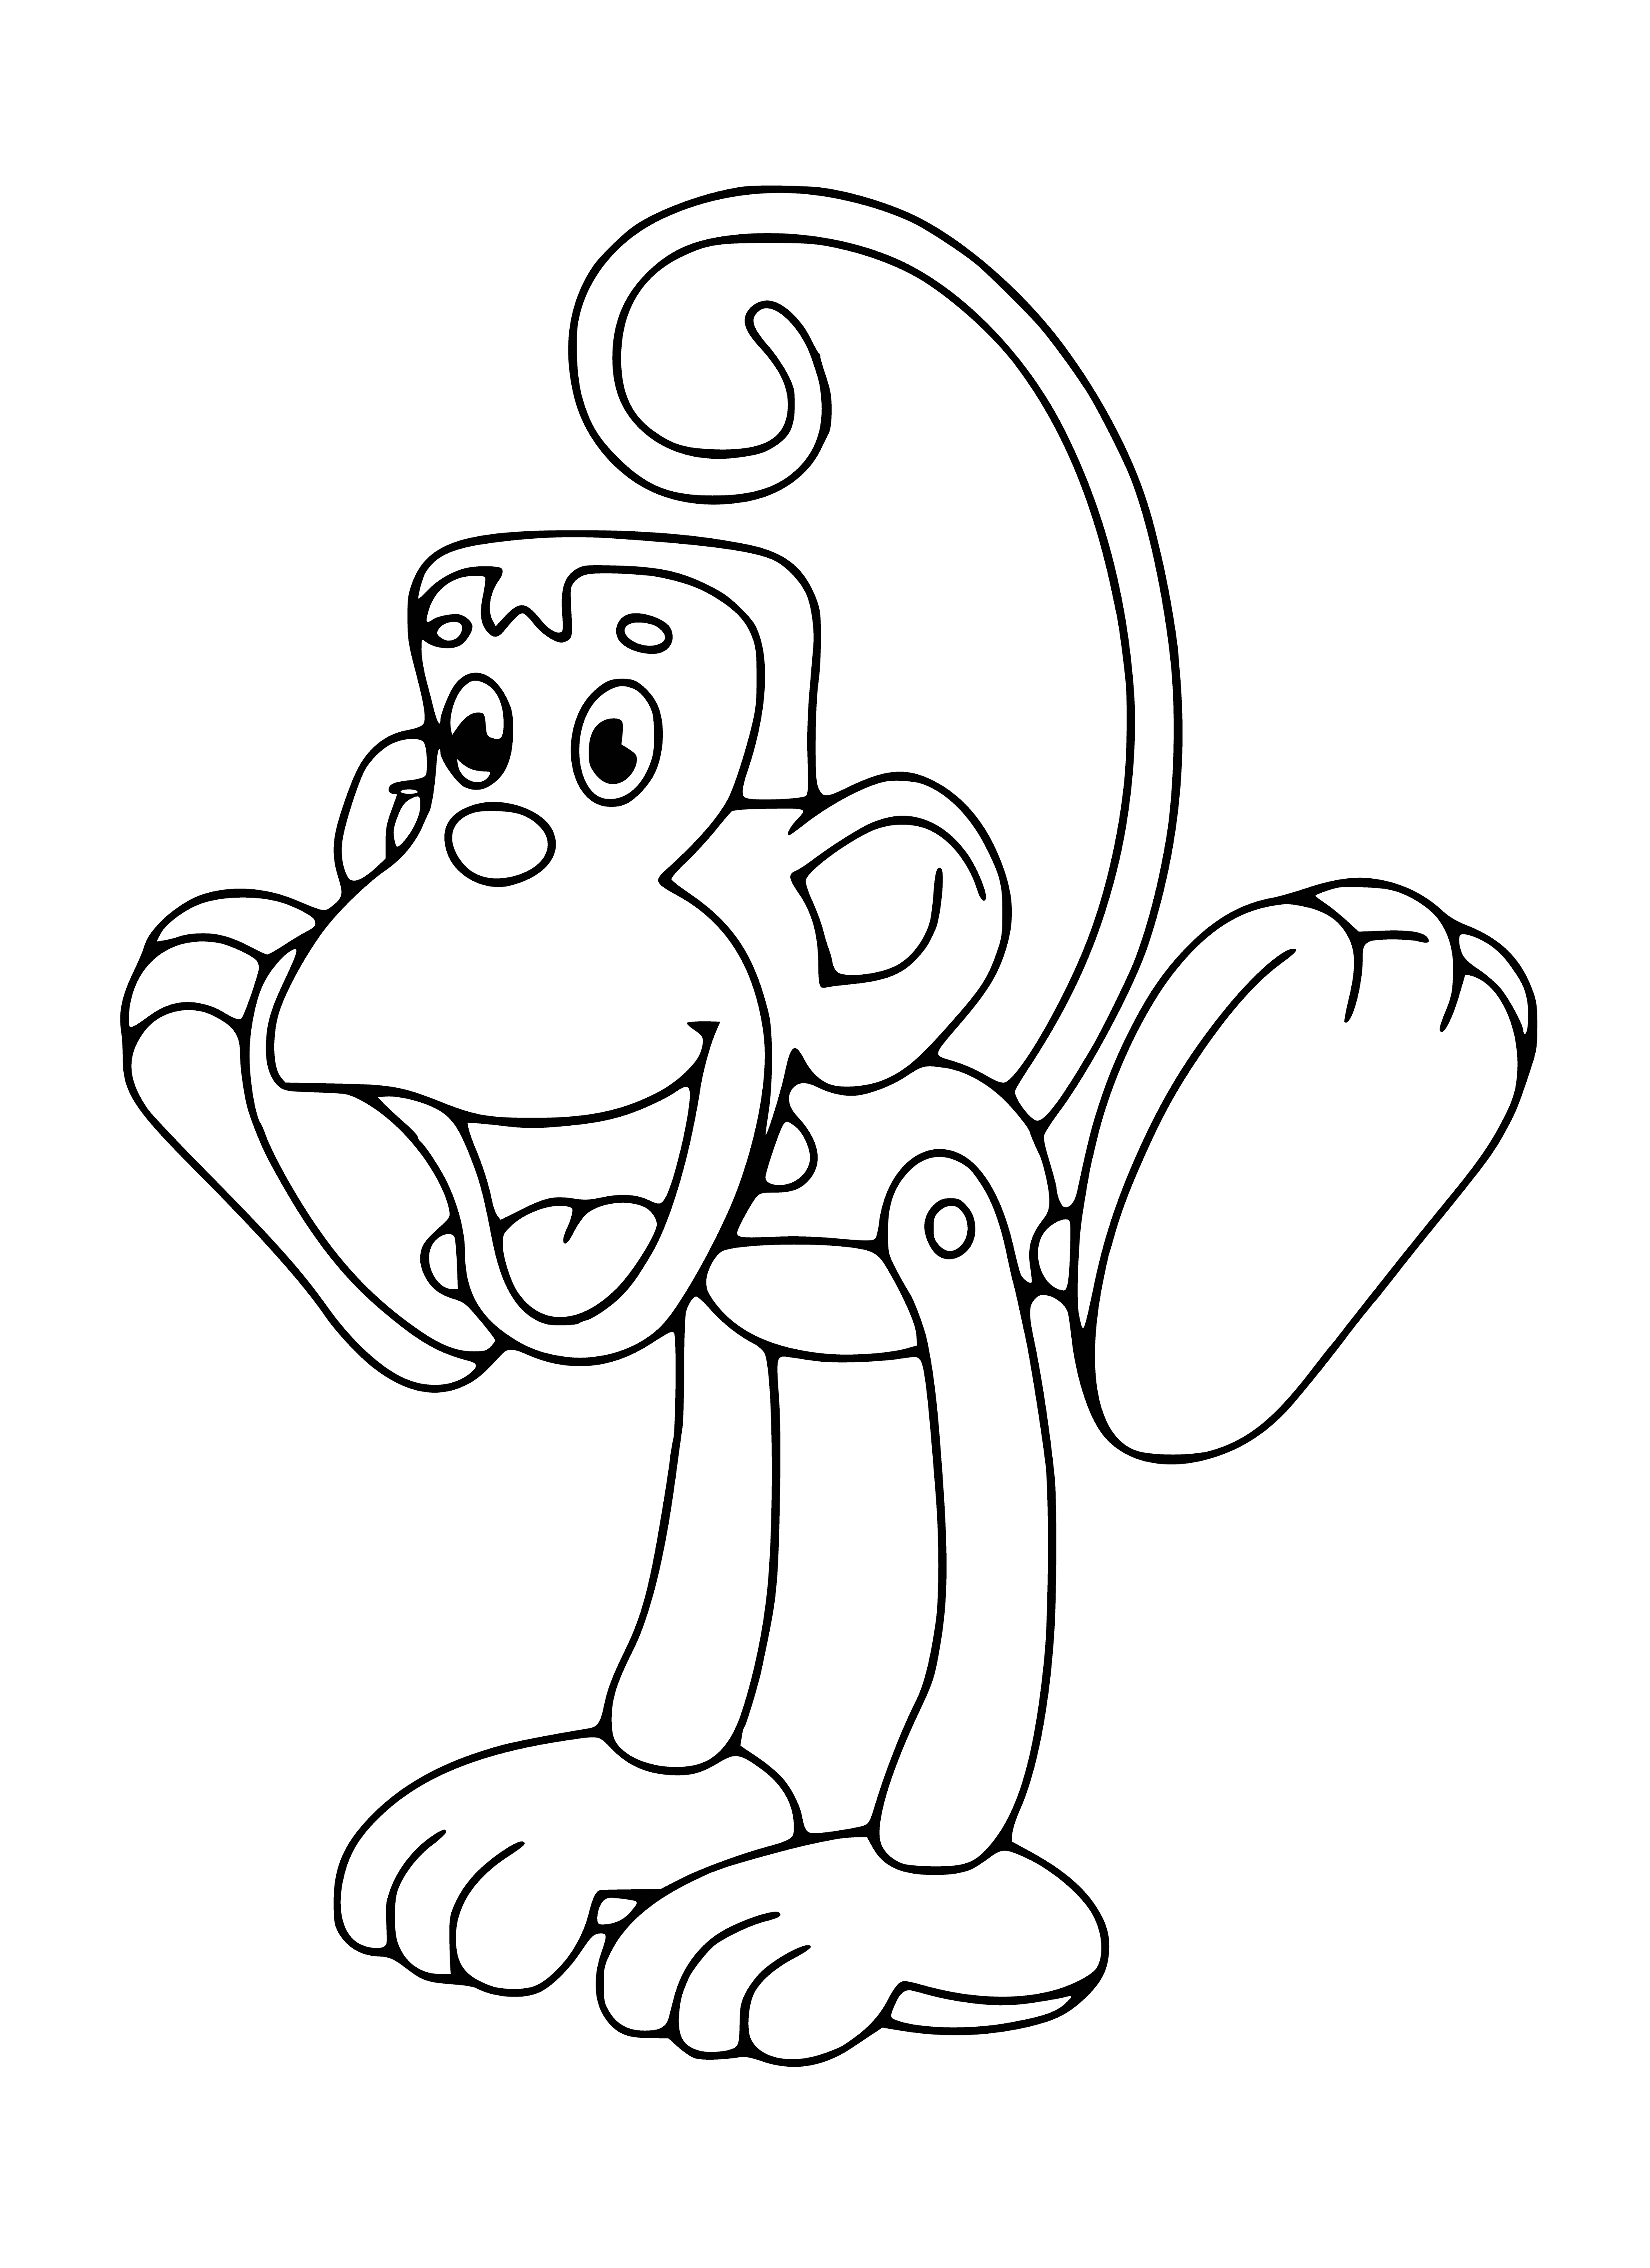 coloring page: Monkeys on bikes, jumping through hoops & balancing in costume delight a cheering crowd.